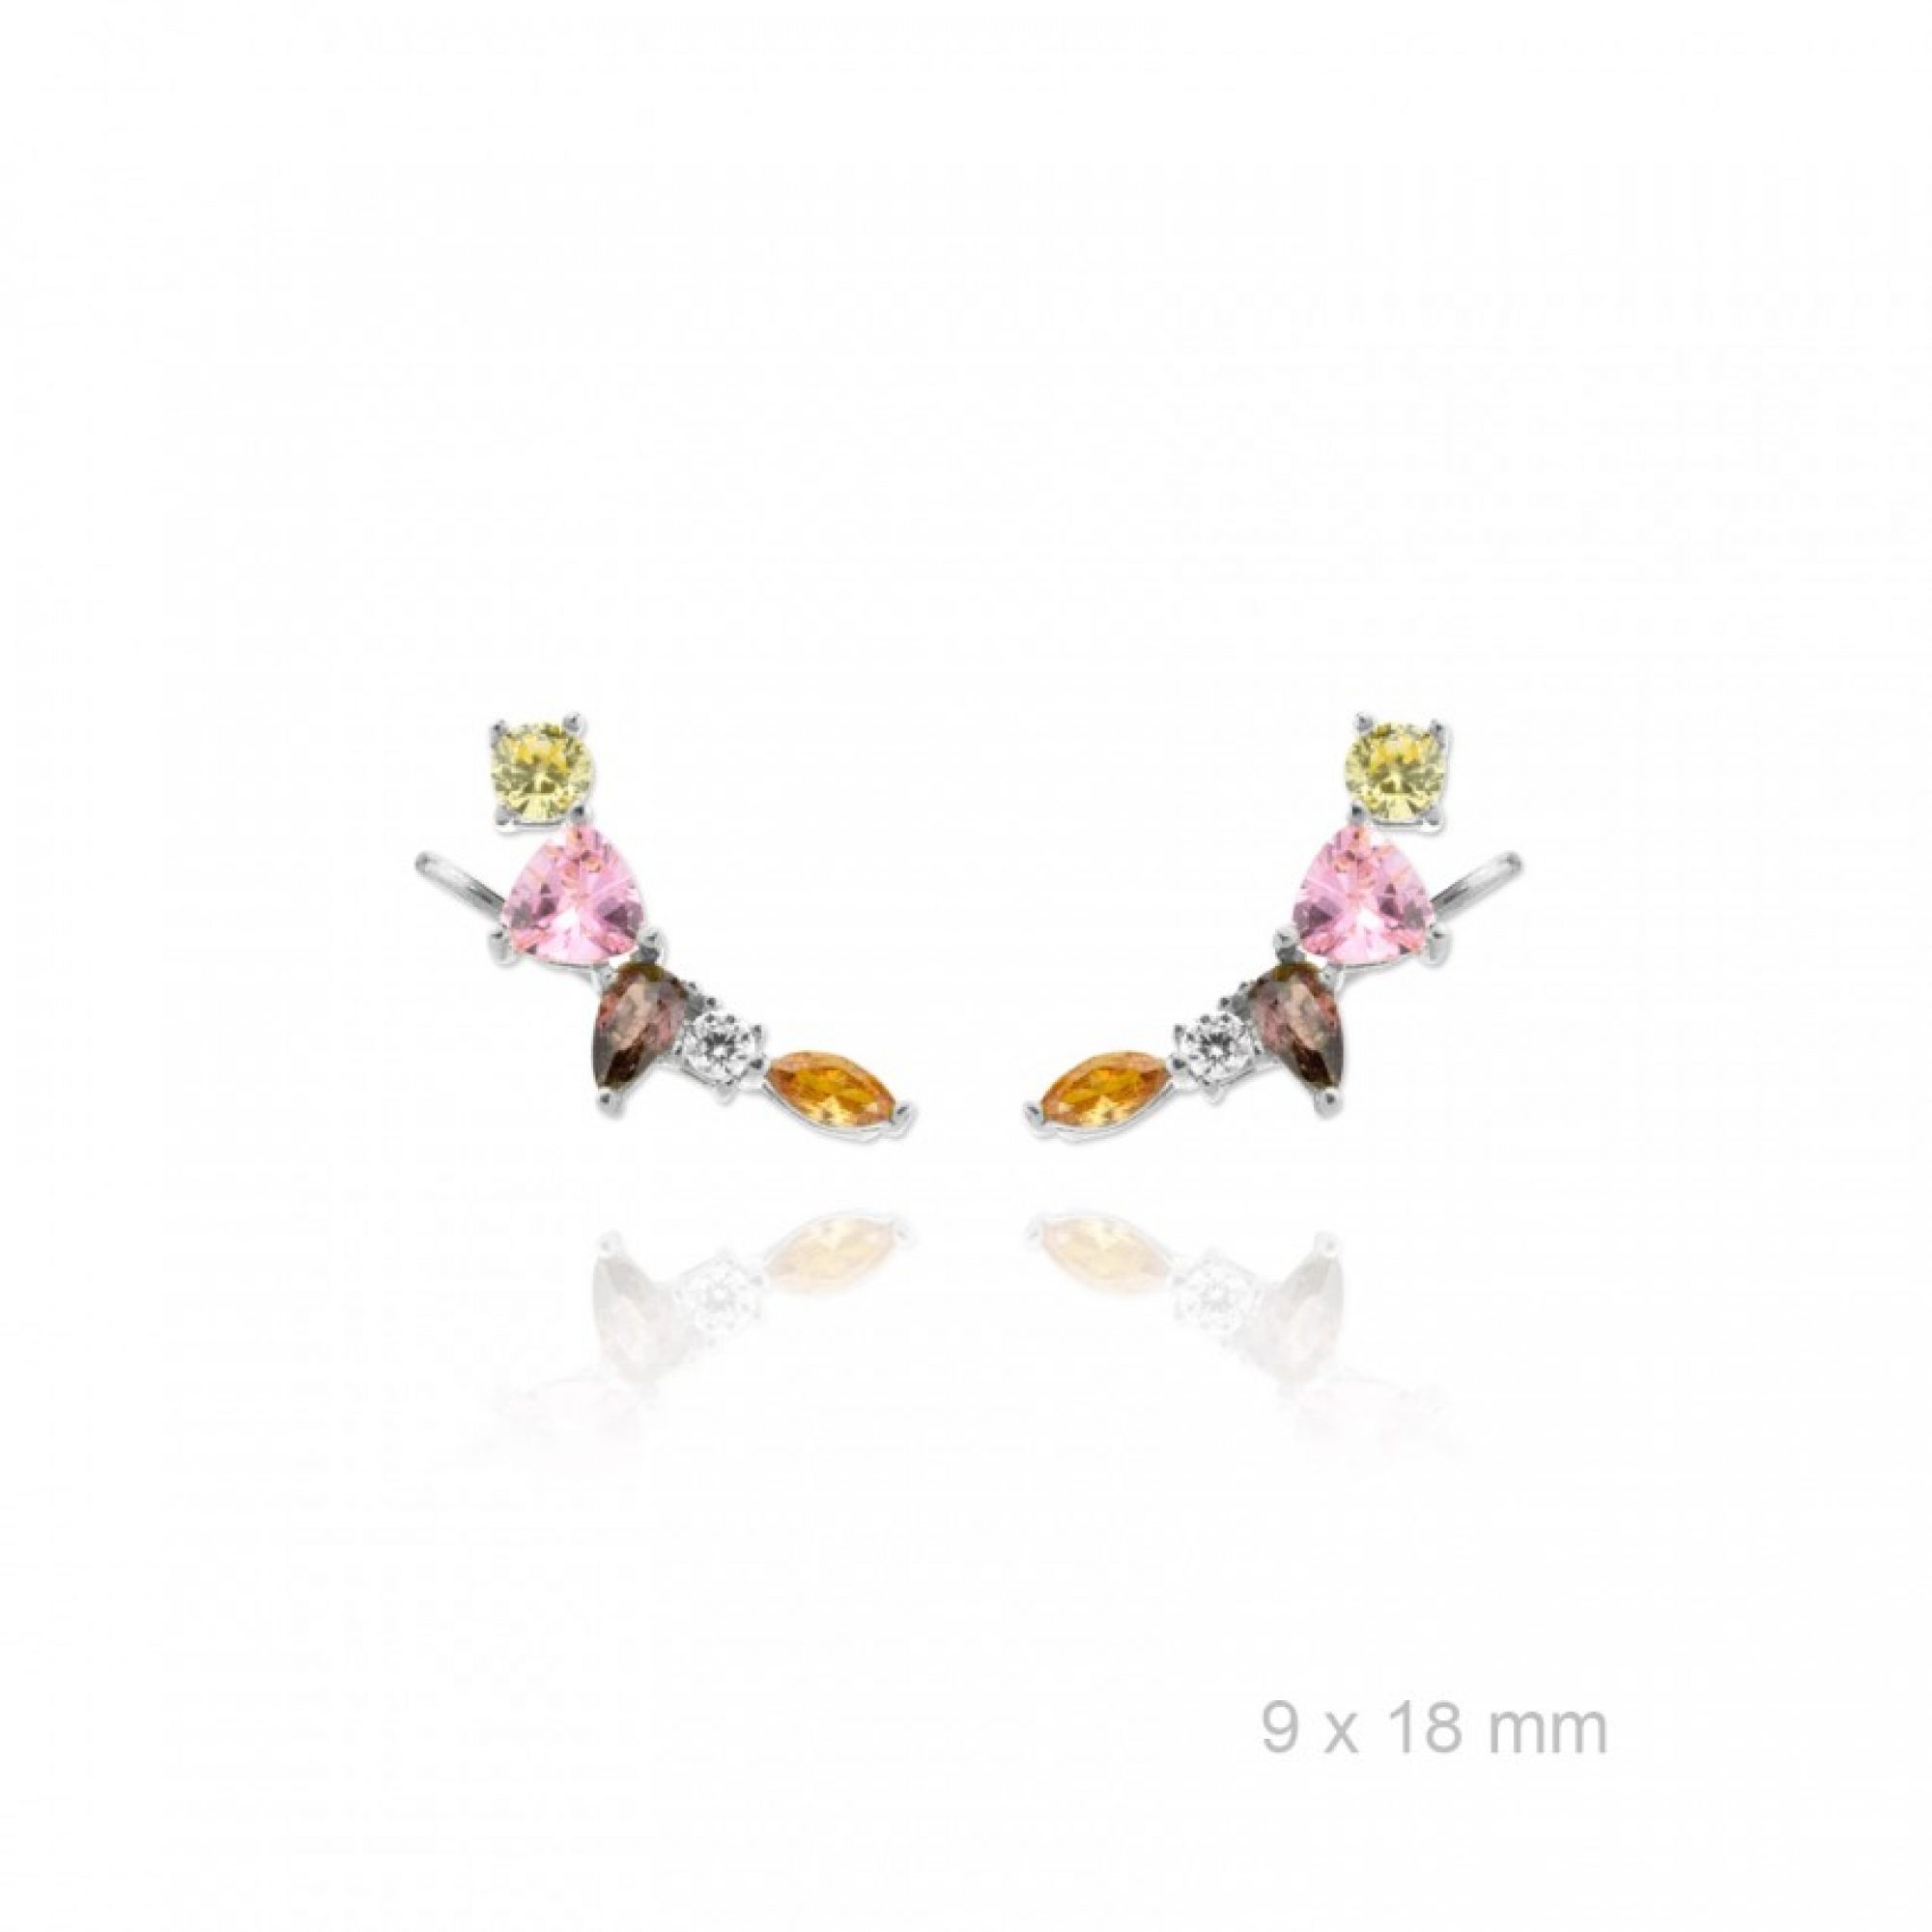 Ear climbers with zircon, amethyst, pink quartz and topaz stones